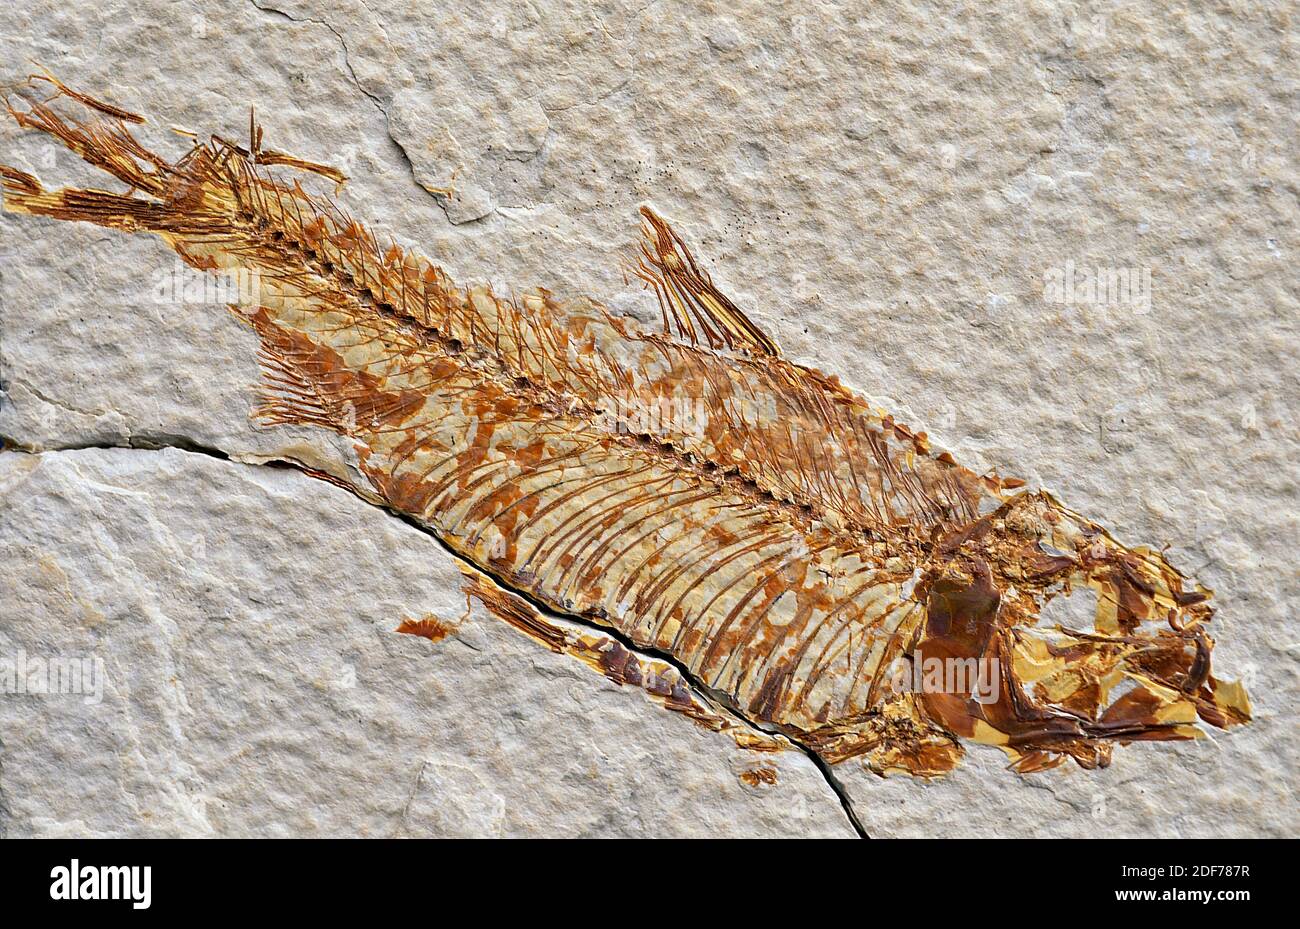 Fossil freshwater fish (Knightia sp. ) that lived on Eocene. Sample. Stock Photo